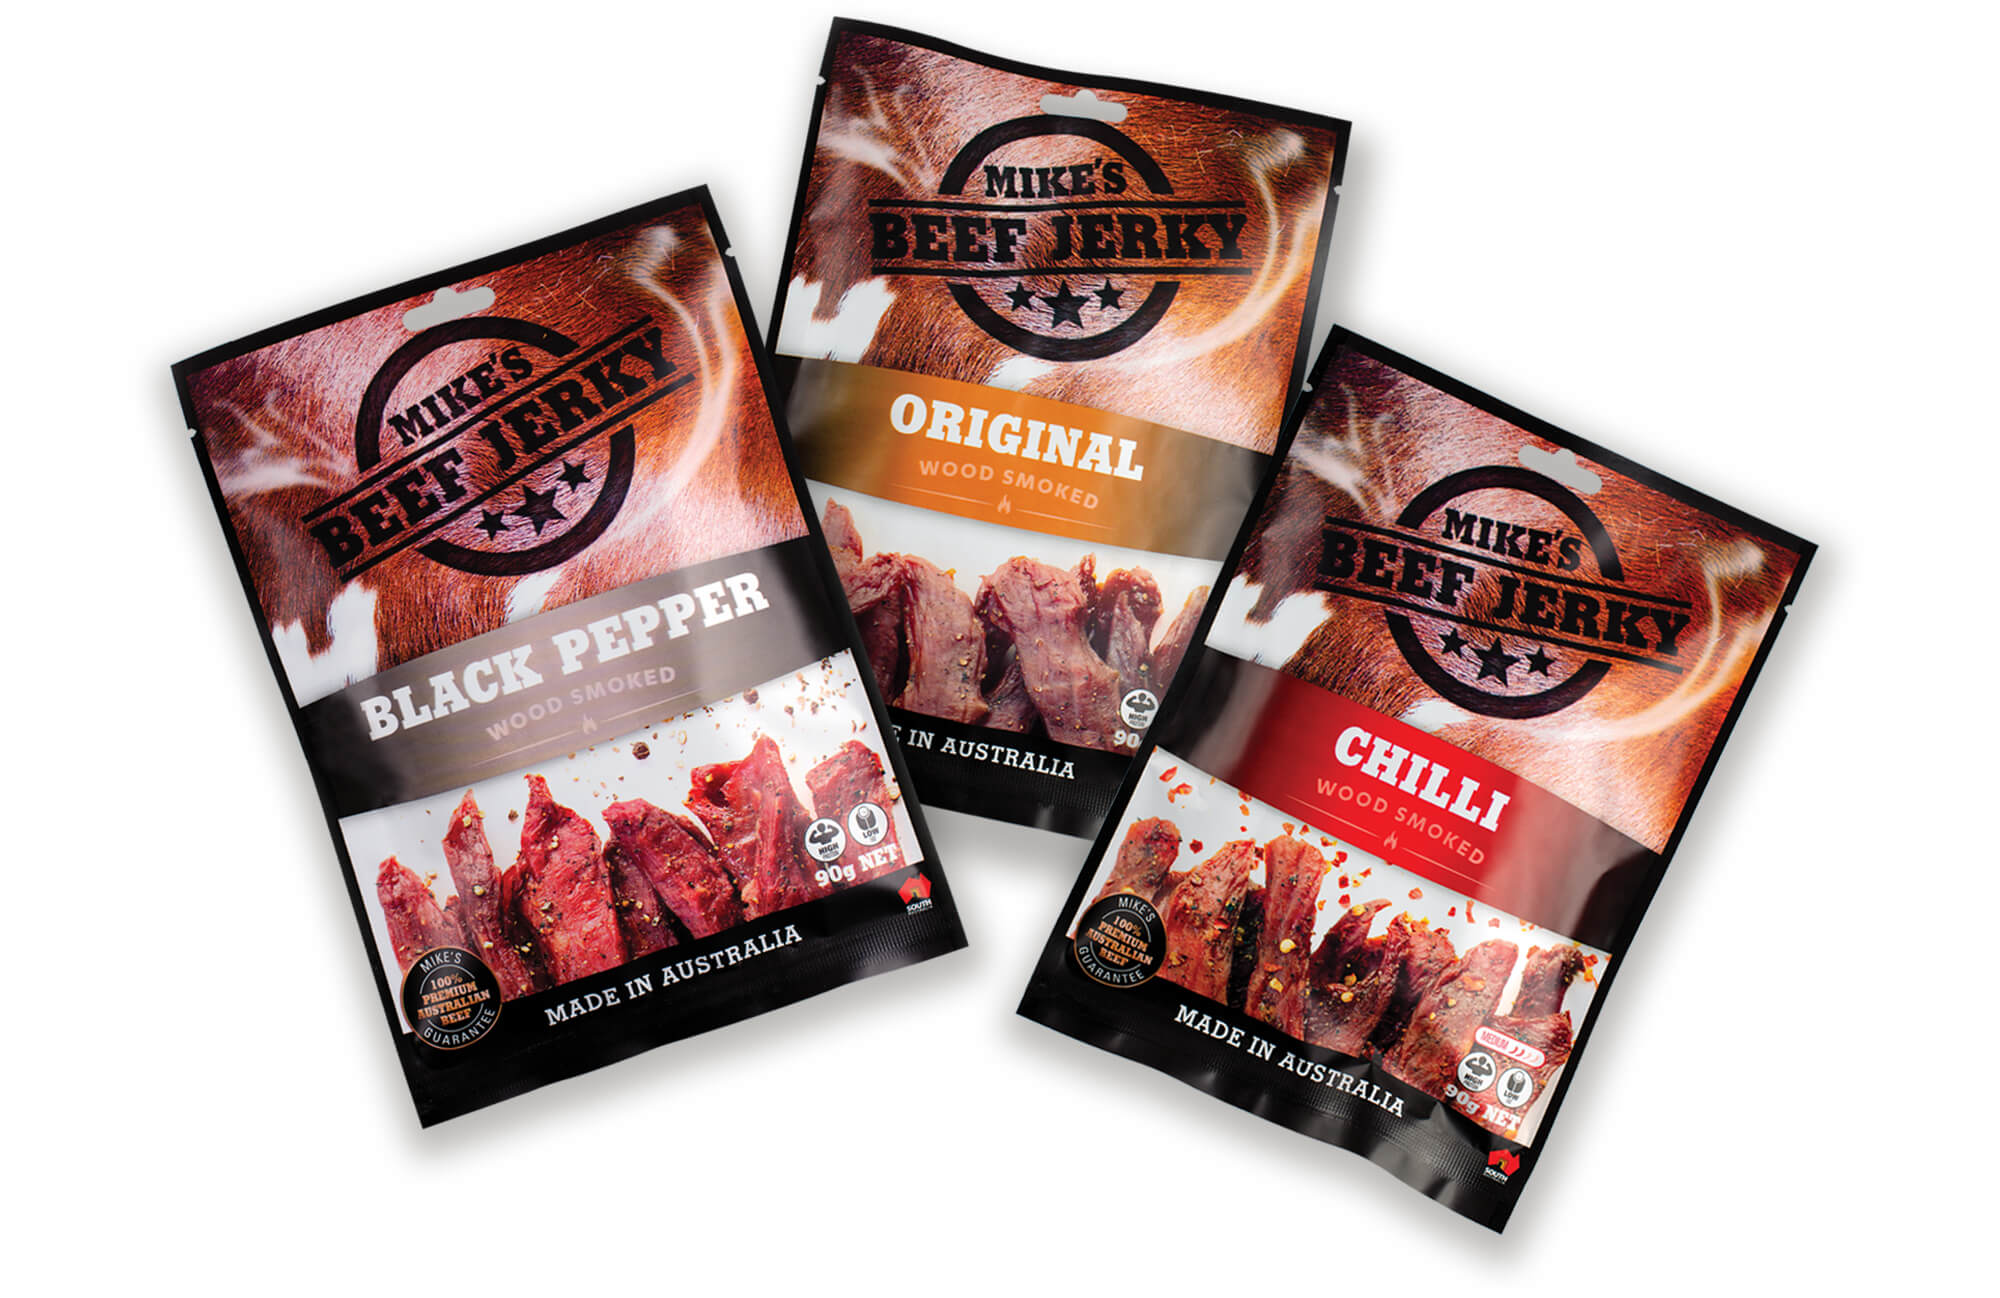 Icon Graphic Design - Label and packaging design Adelaide image of a Mike's Beef Jerky packages x 3 kinds.